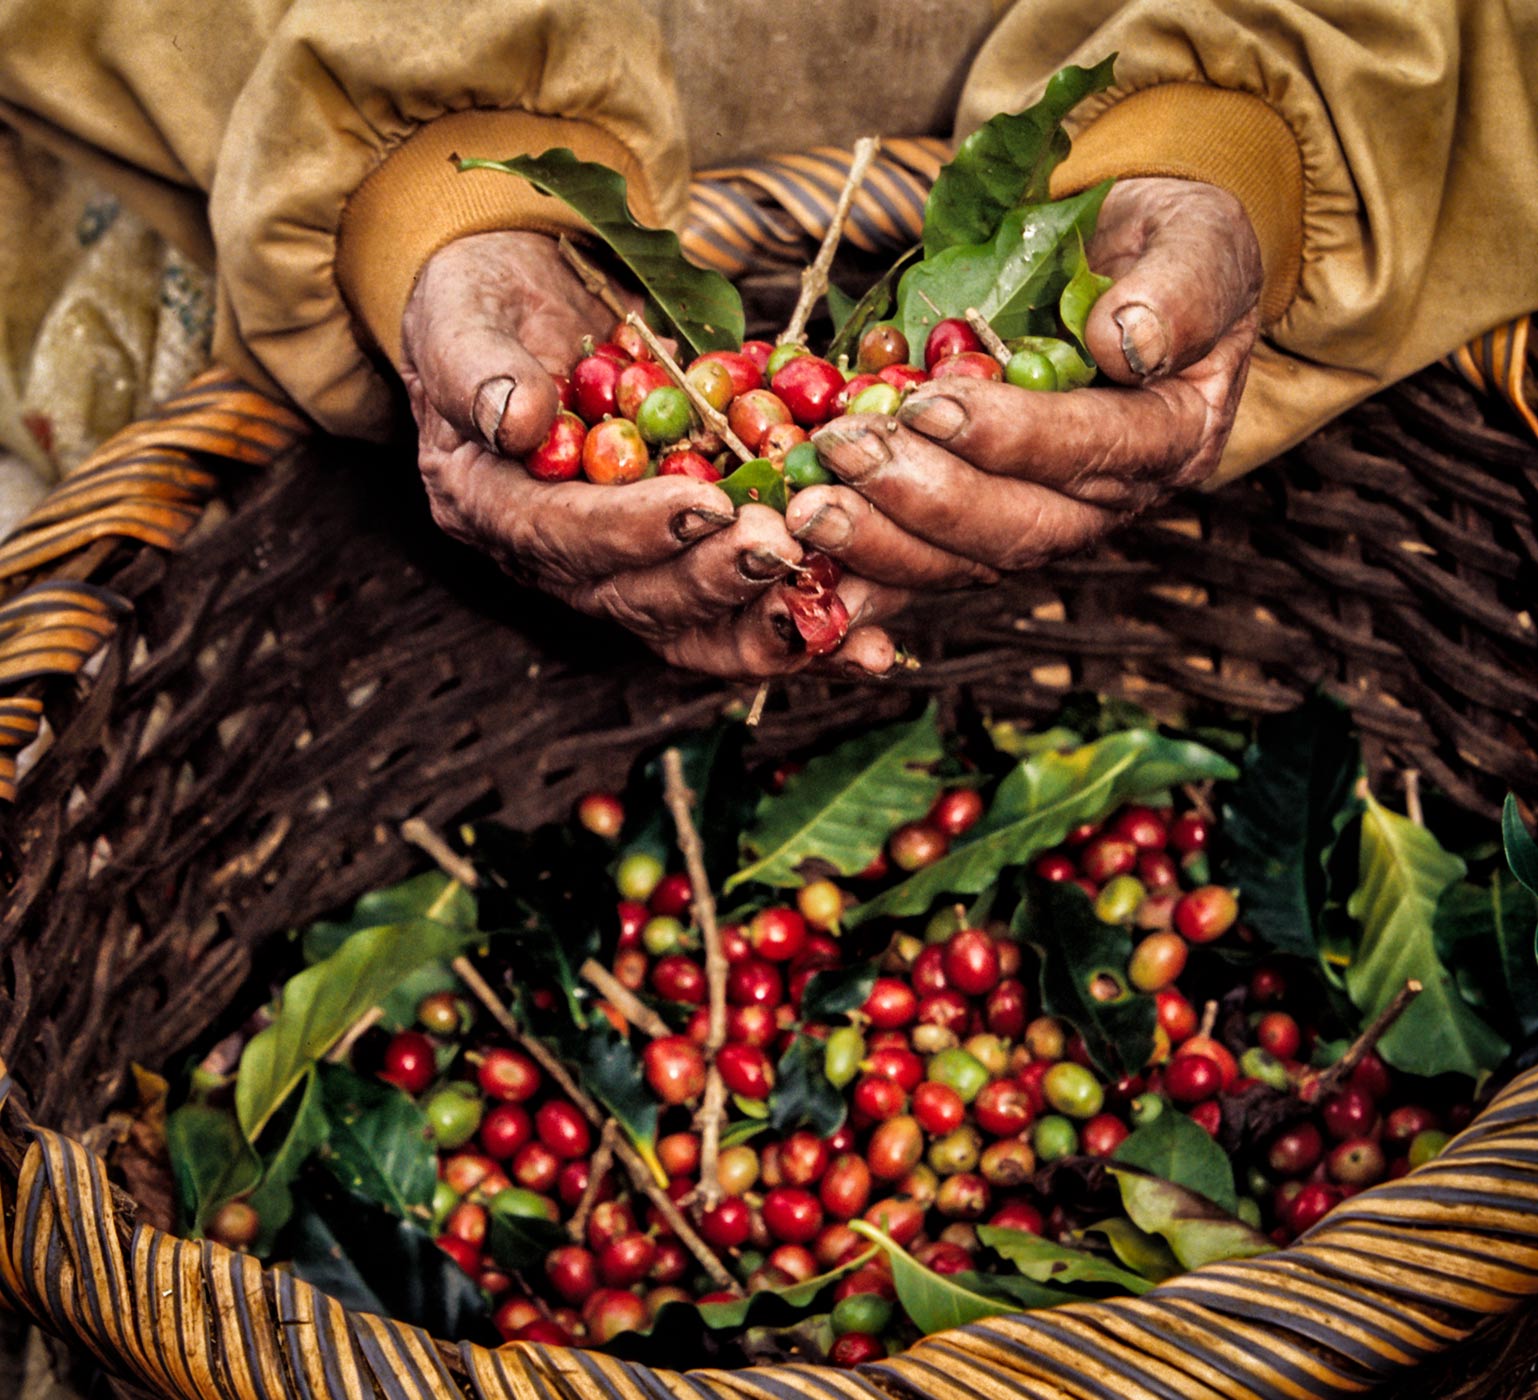 Costa Rican holding coffee cherries over basket filled with cherries. 